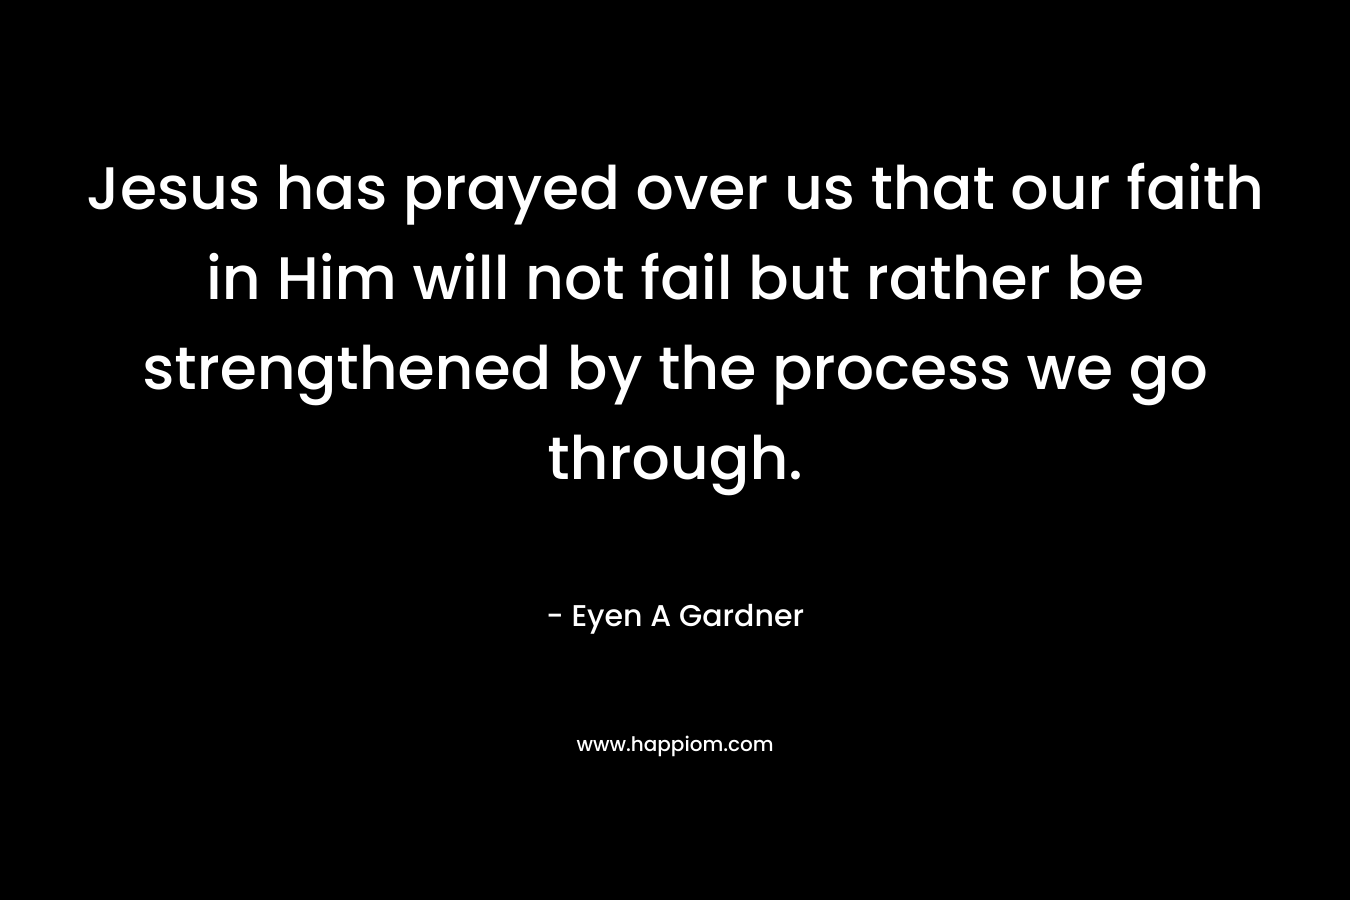 Jesus has prayed over us that our faith in Him will not fail but rather be strengthened by the process we go through. – Eyen A Gardner